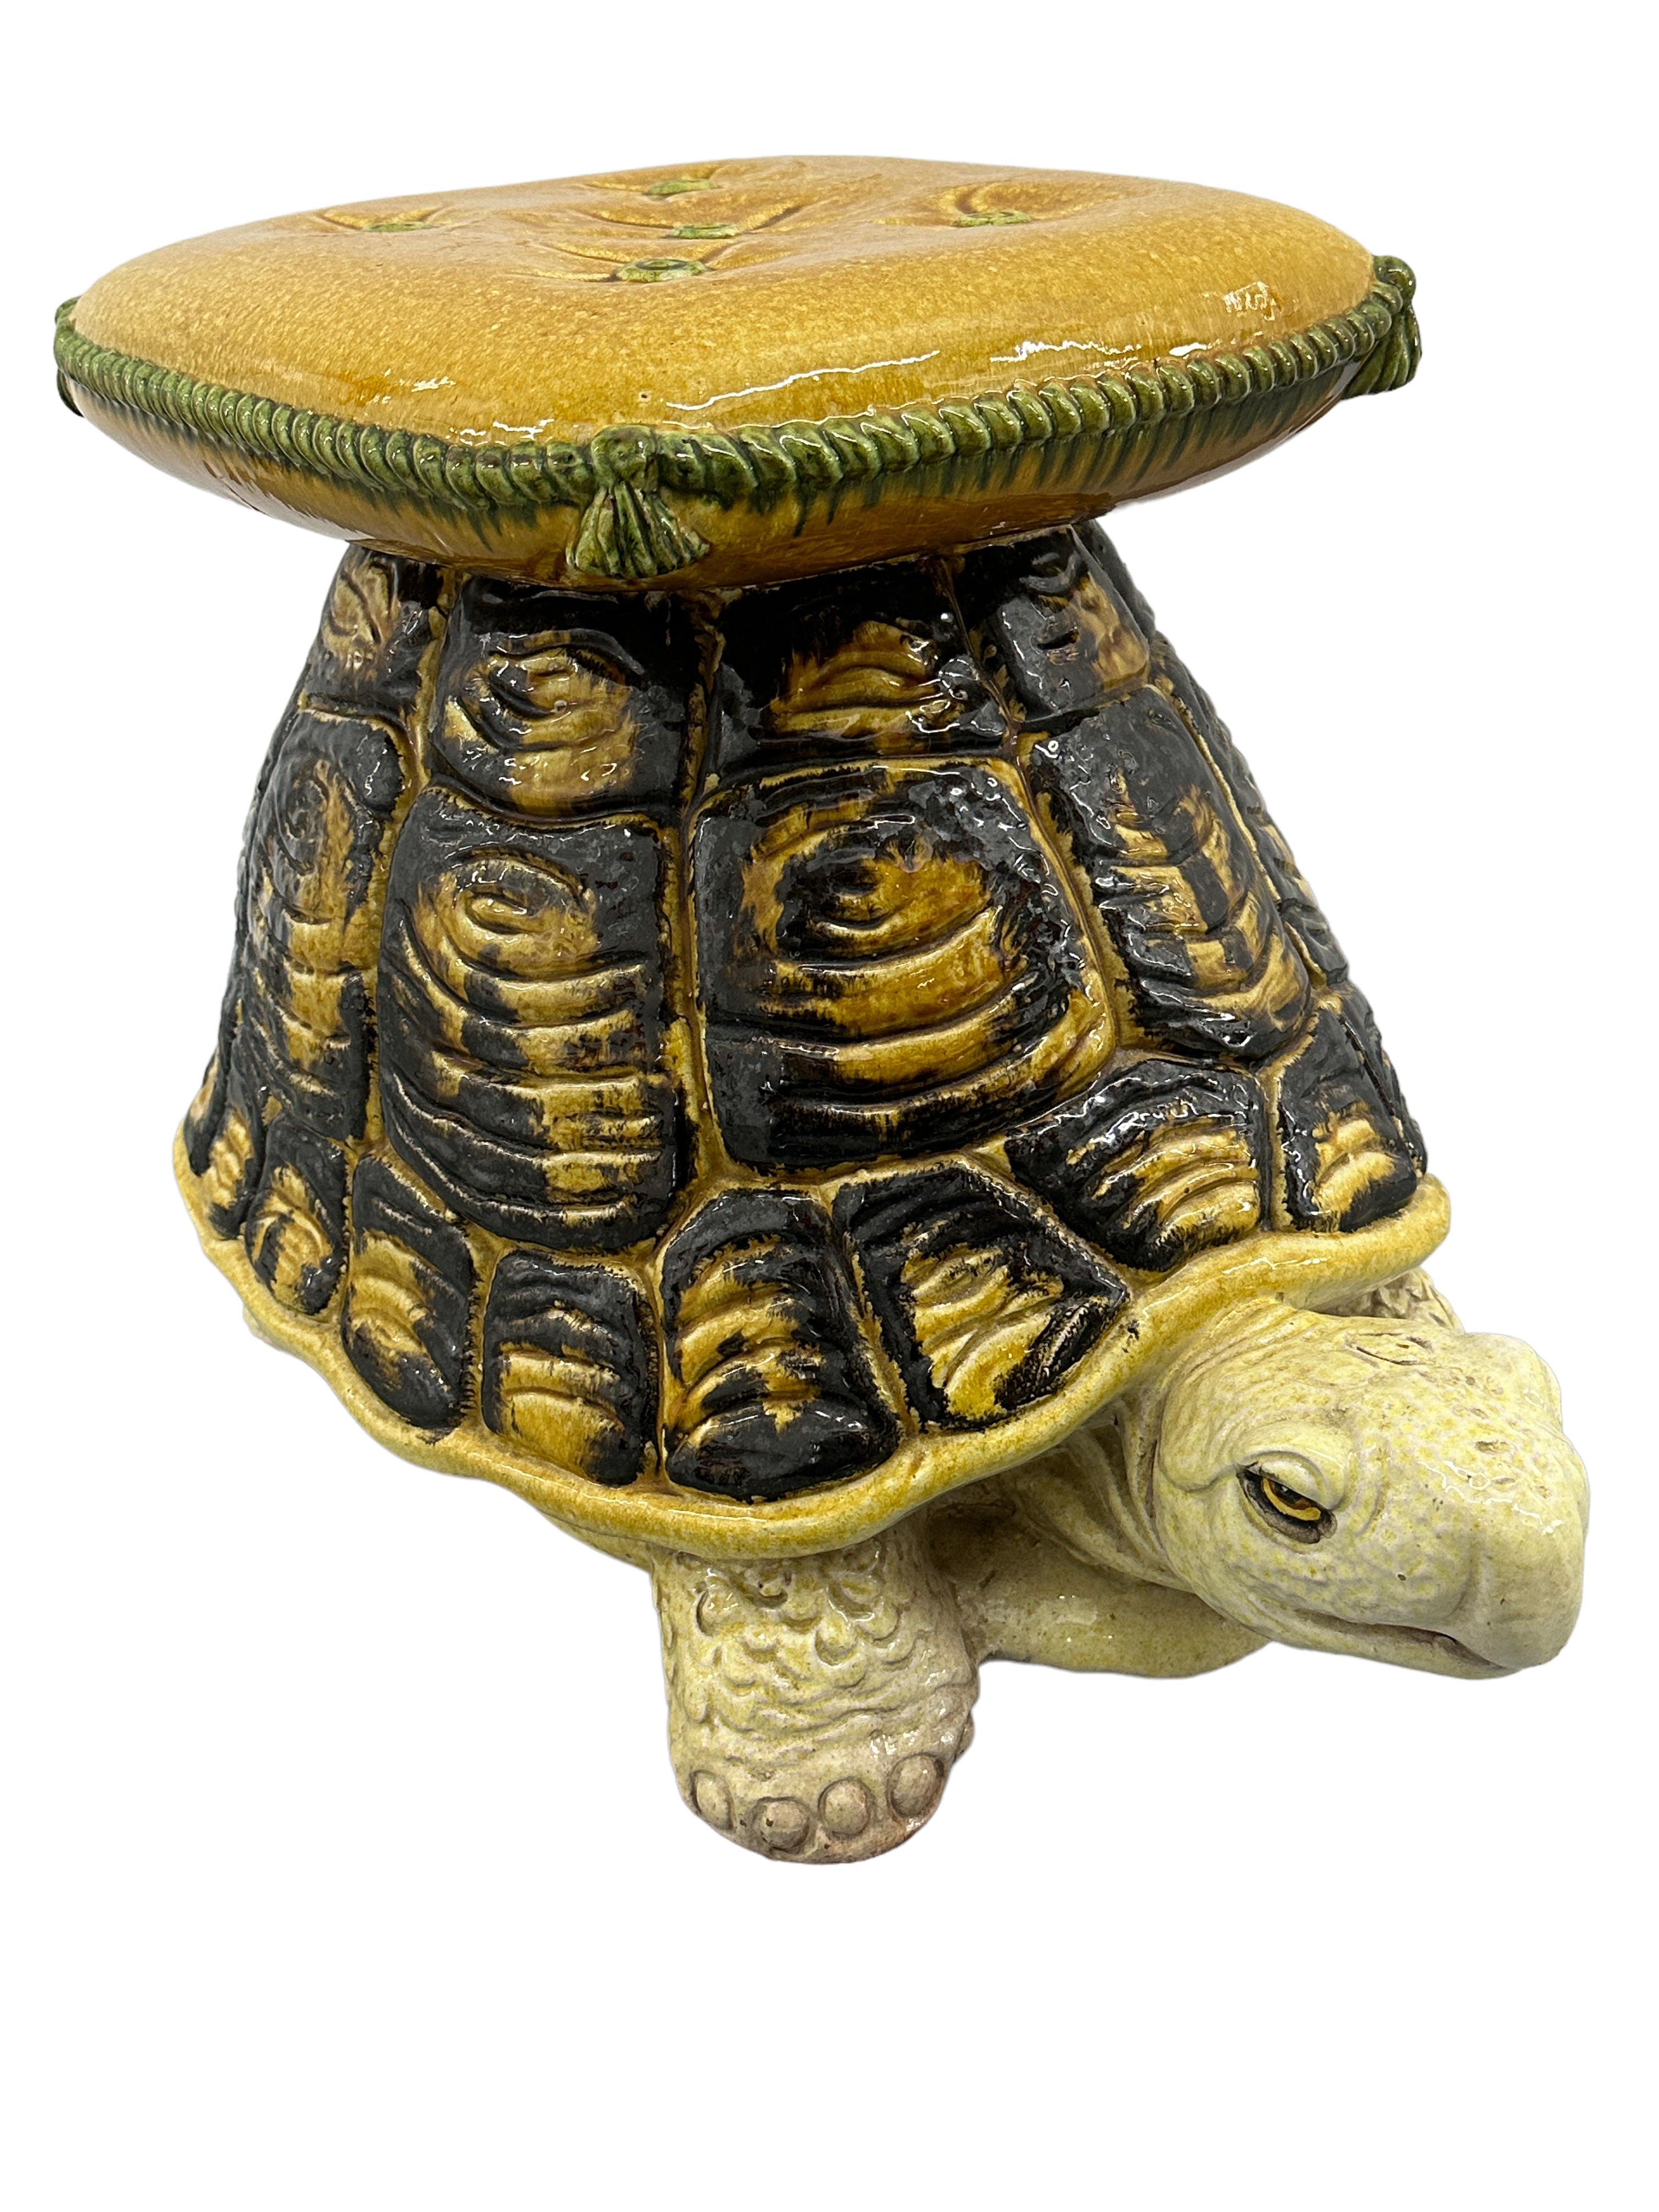 Hand-Crafted Hollywood Regency Terracotta Turtle Garden Plant Stand, Seat or Patio Decoration